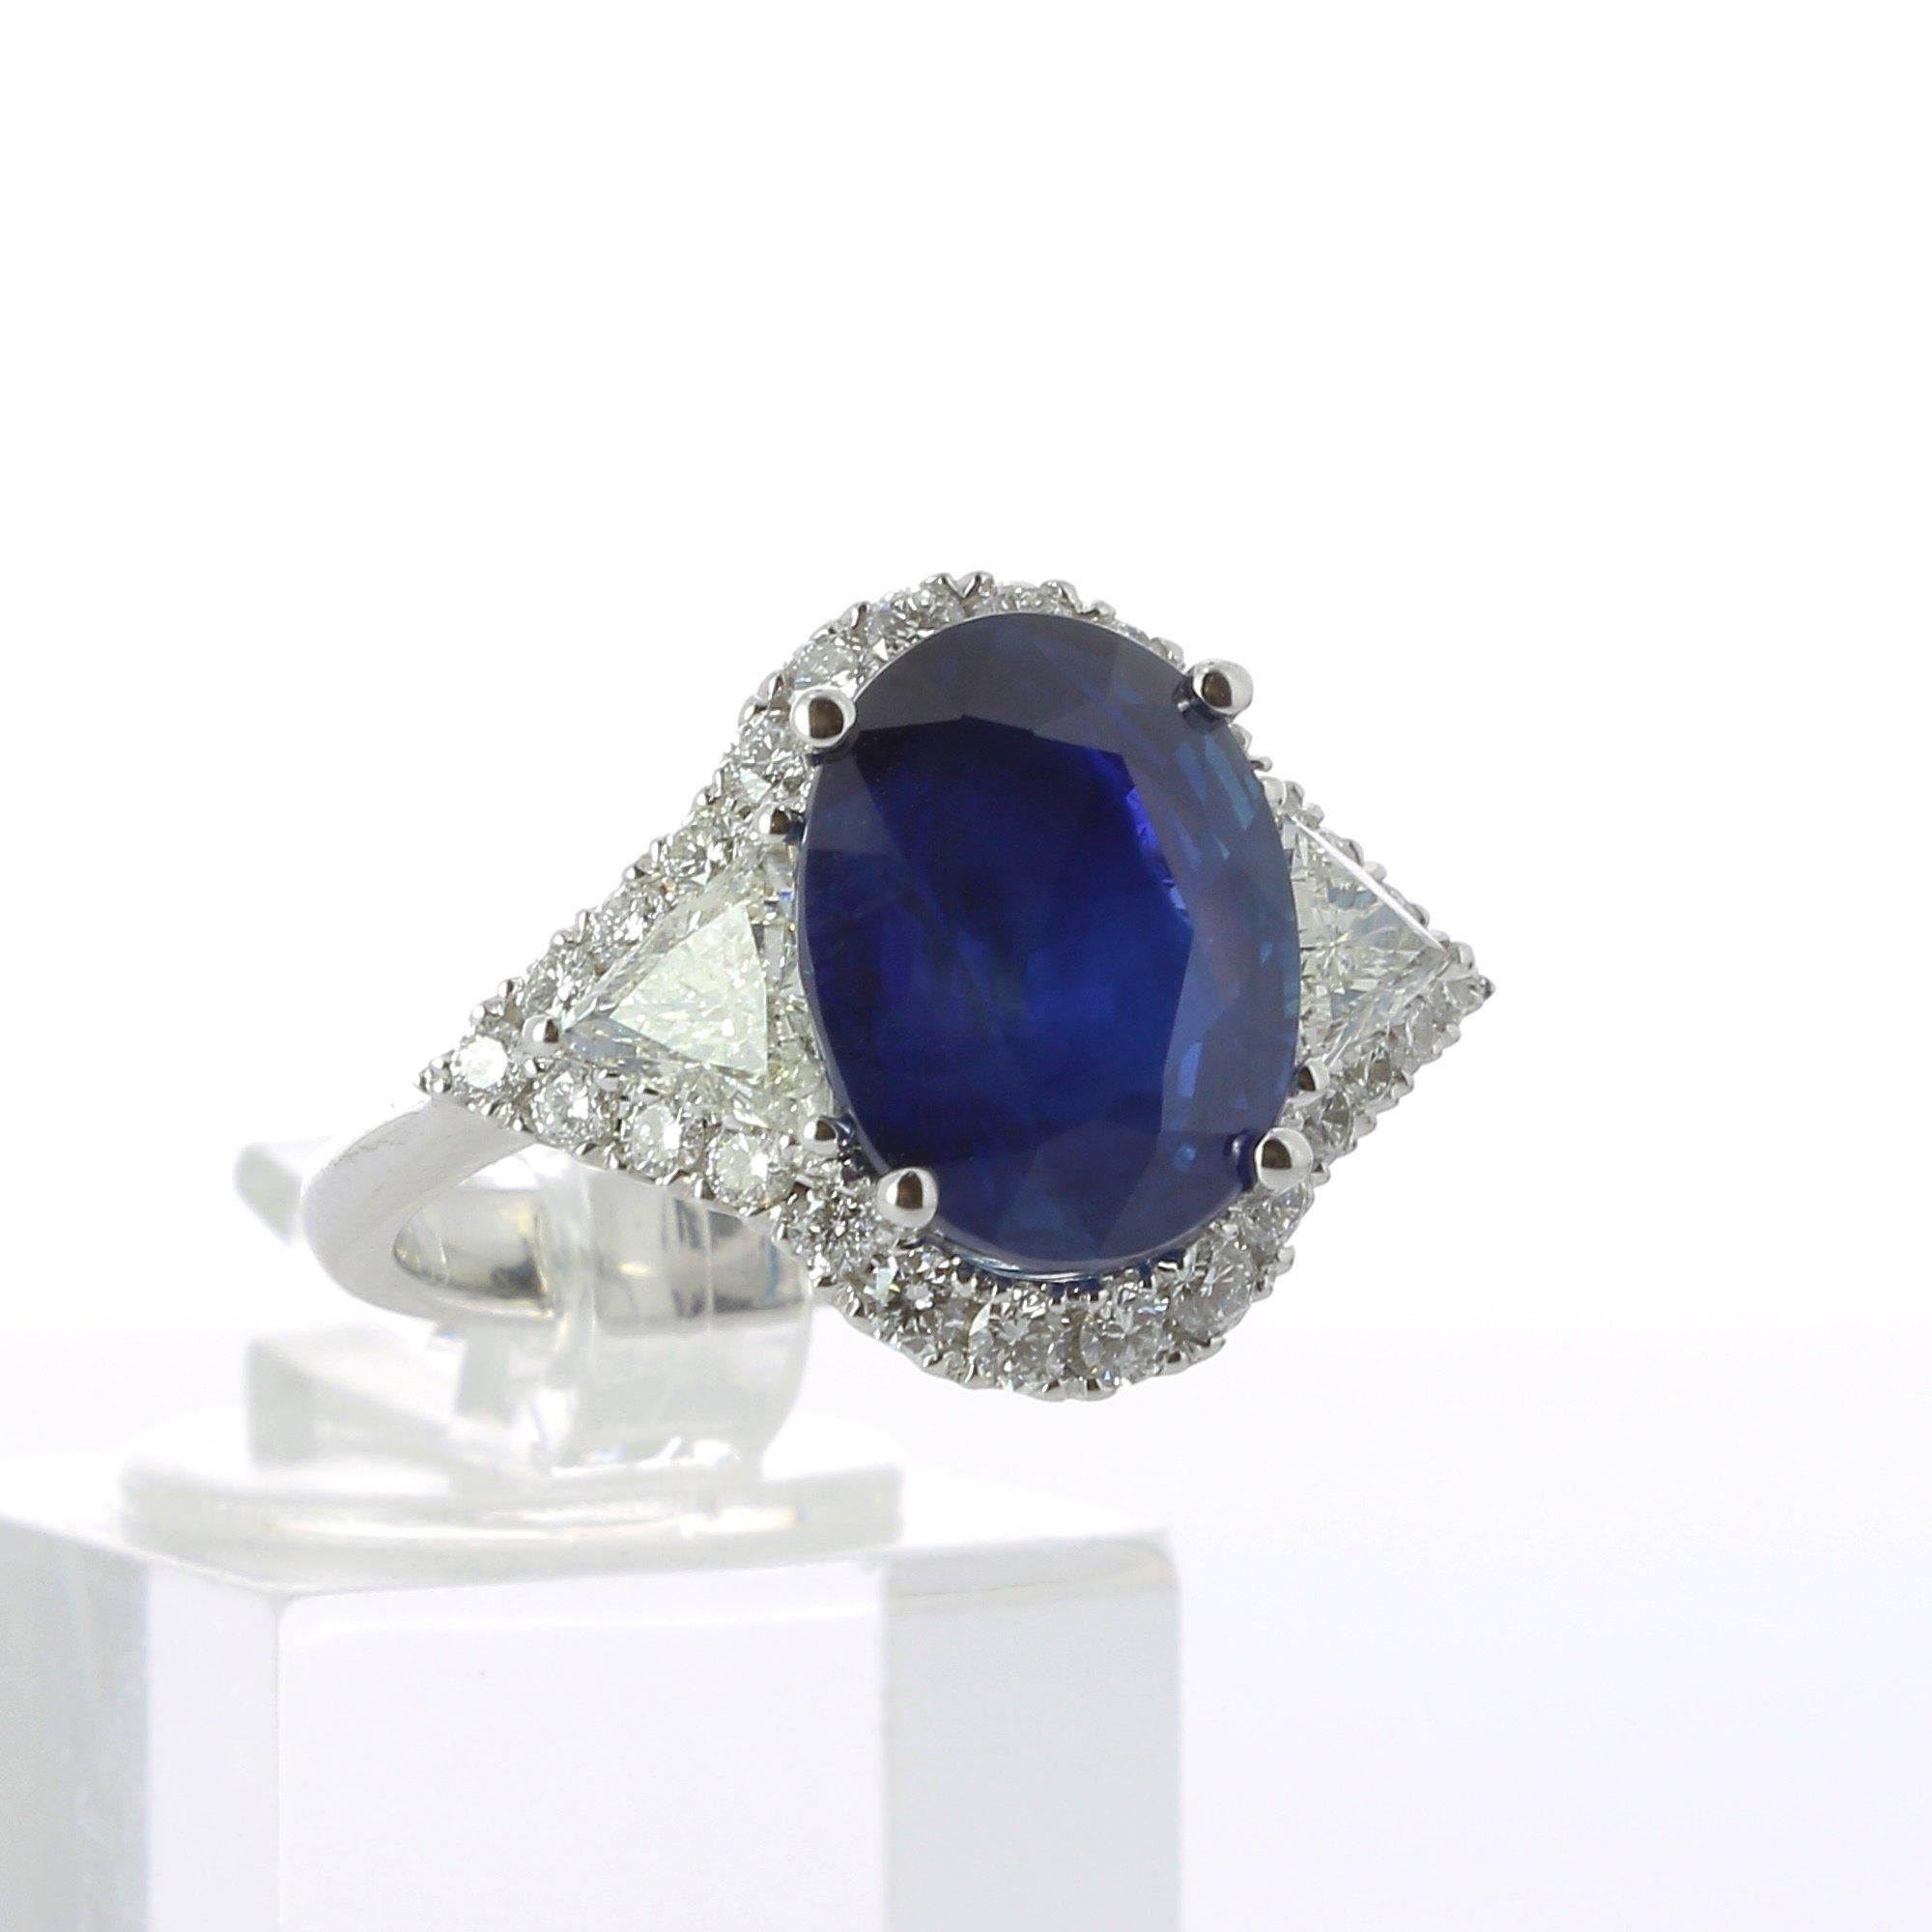 An amazing Oval Sapphire Ring, flanked on each side by a single Triangle Diamond and surround with an halo of Diamond weighing 0.26 Carats.
The total weight of the Sapphire is 5.29 Carats.
The halo of diamond is set with 26 Round diamond. 
The